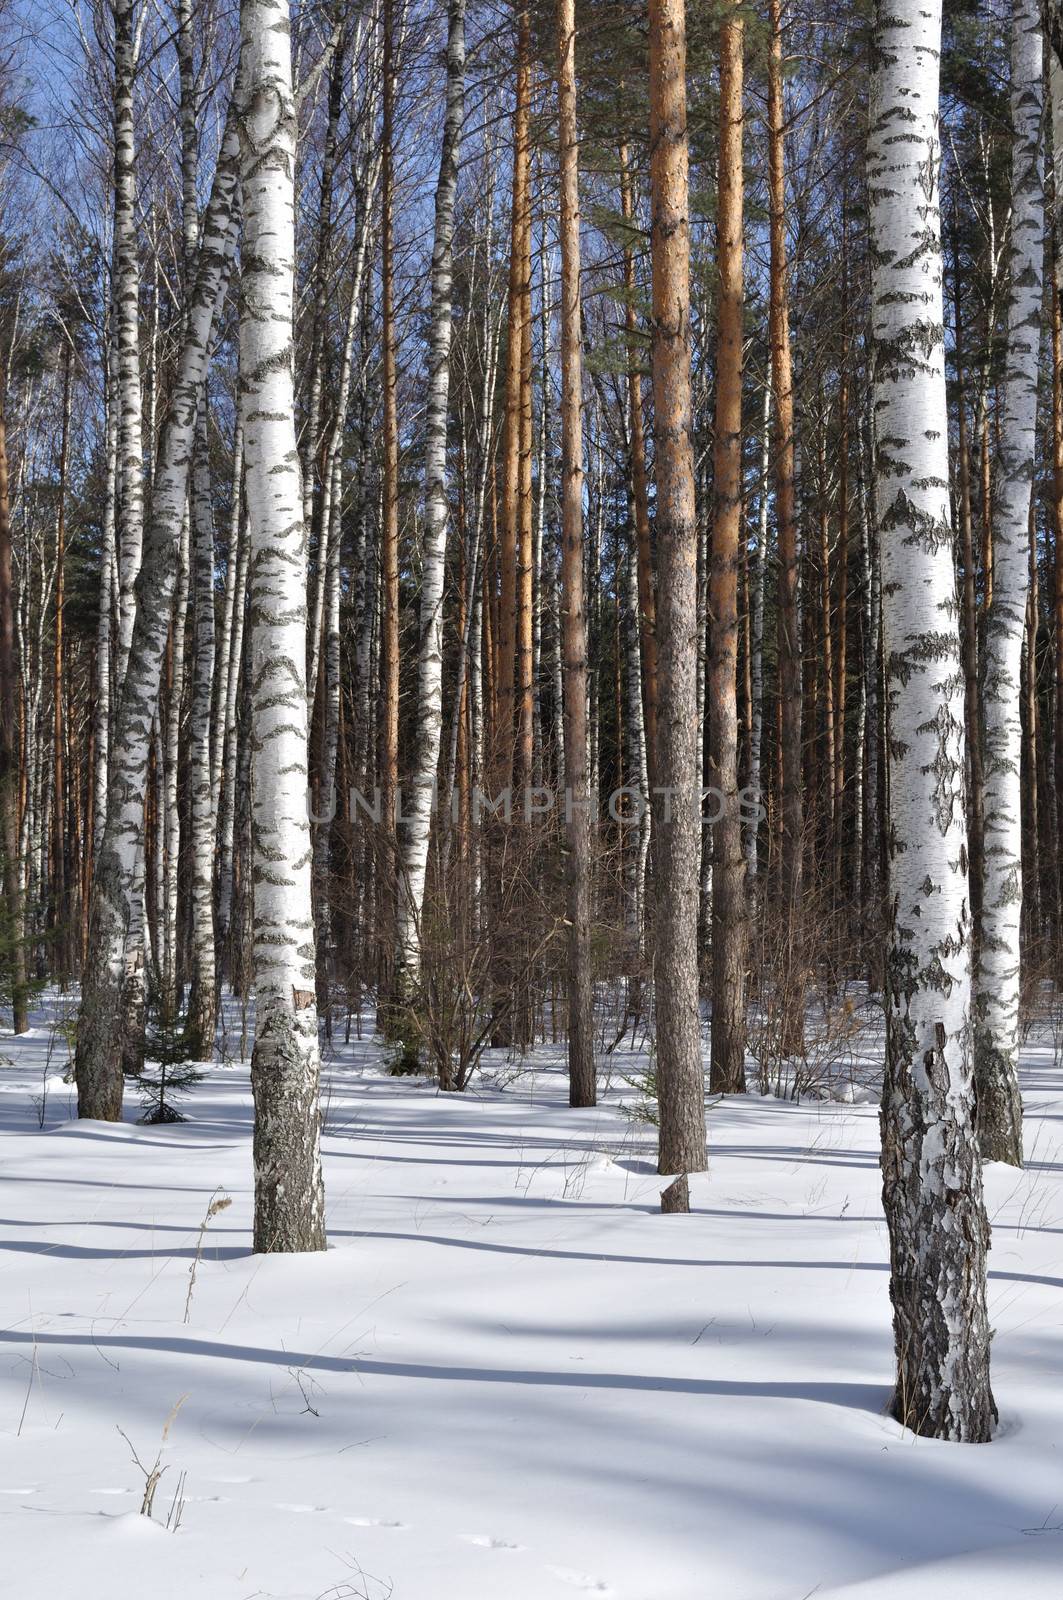 View of birch trees in winter forest